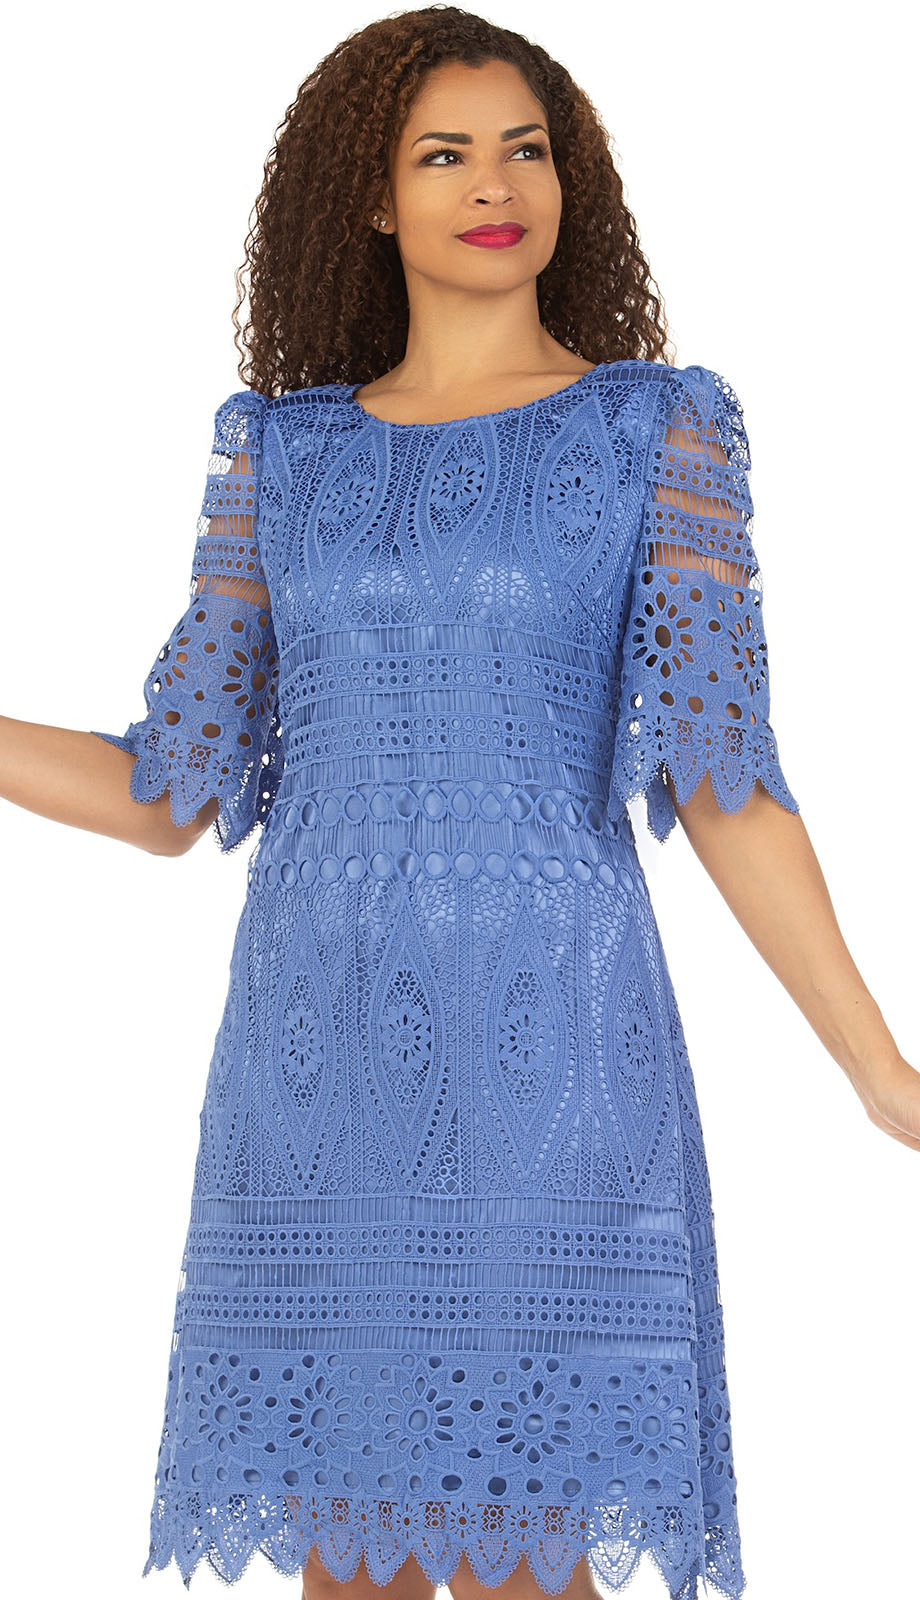 Giovanna D1569-BLU ( 1pc Lace Ladies Church Dress With Embroidered Cutout Short Sleeves )